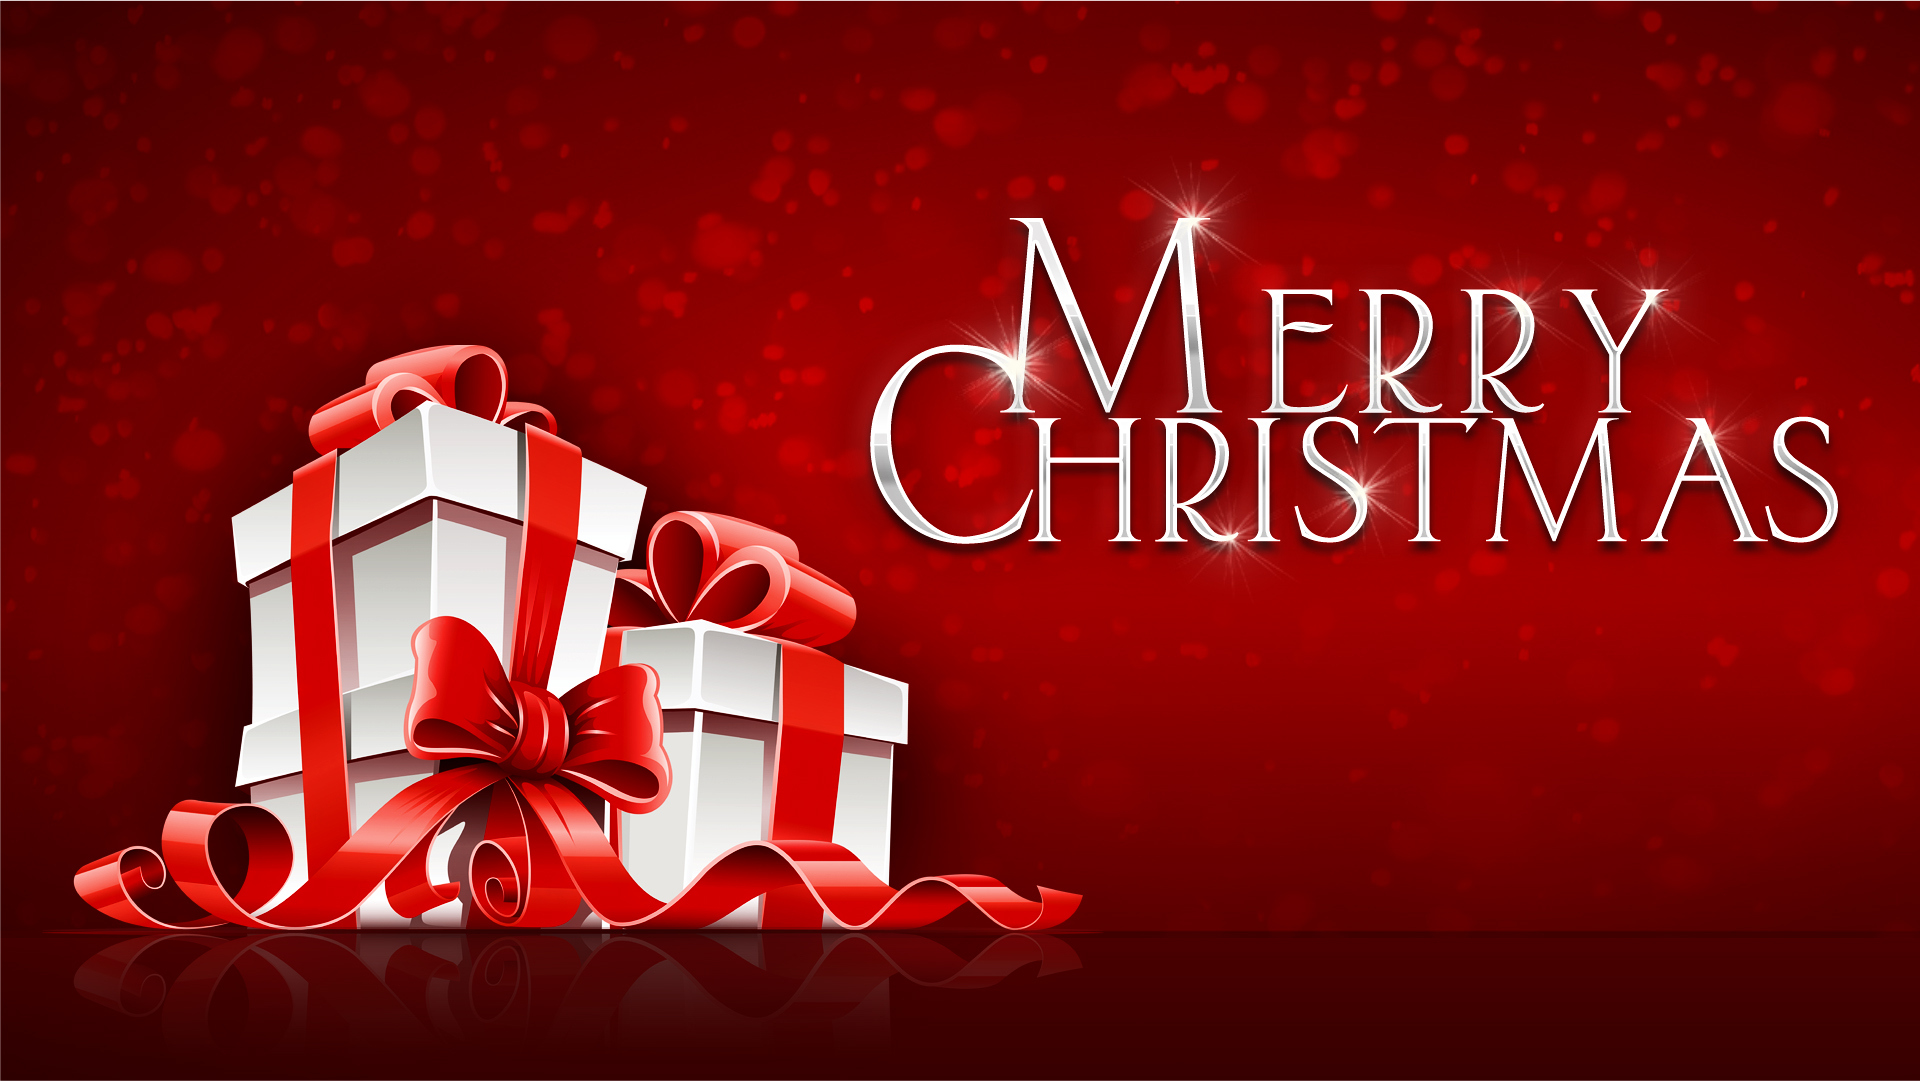 Merry Christmas HD Wallpapers Best HD Wallpapers